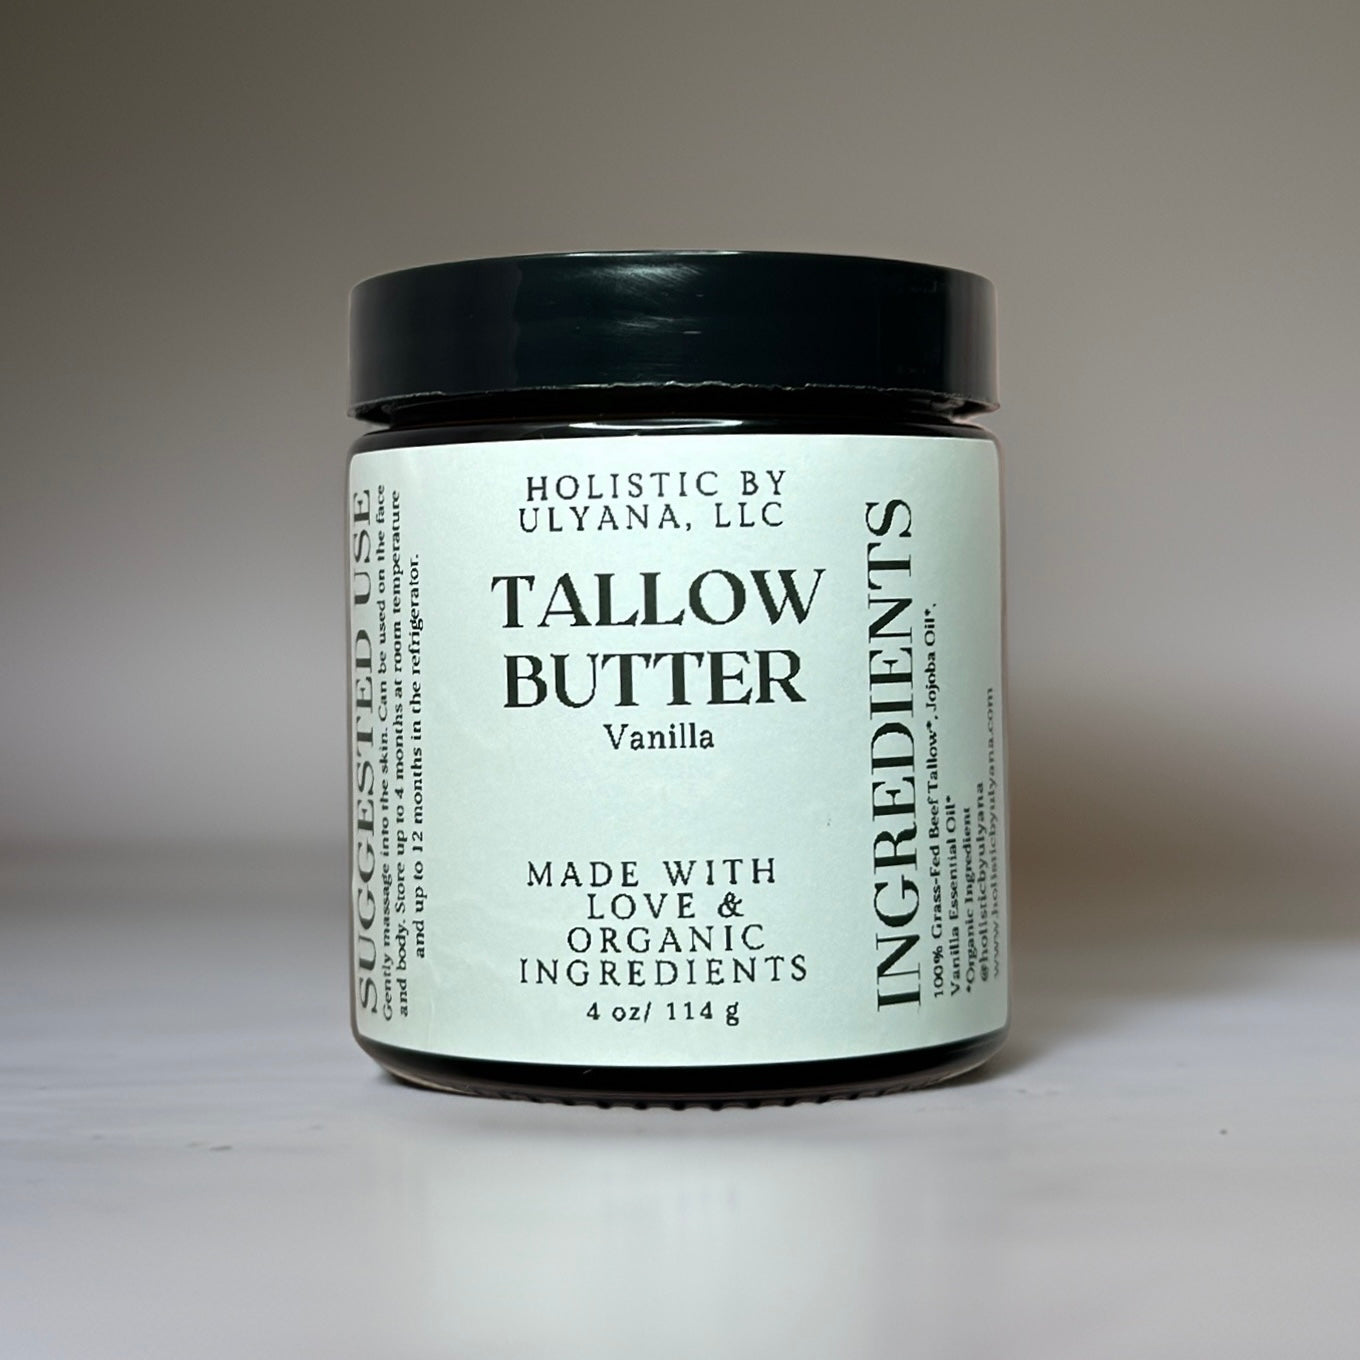 The Classic Tallow Face Butter